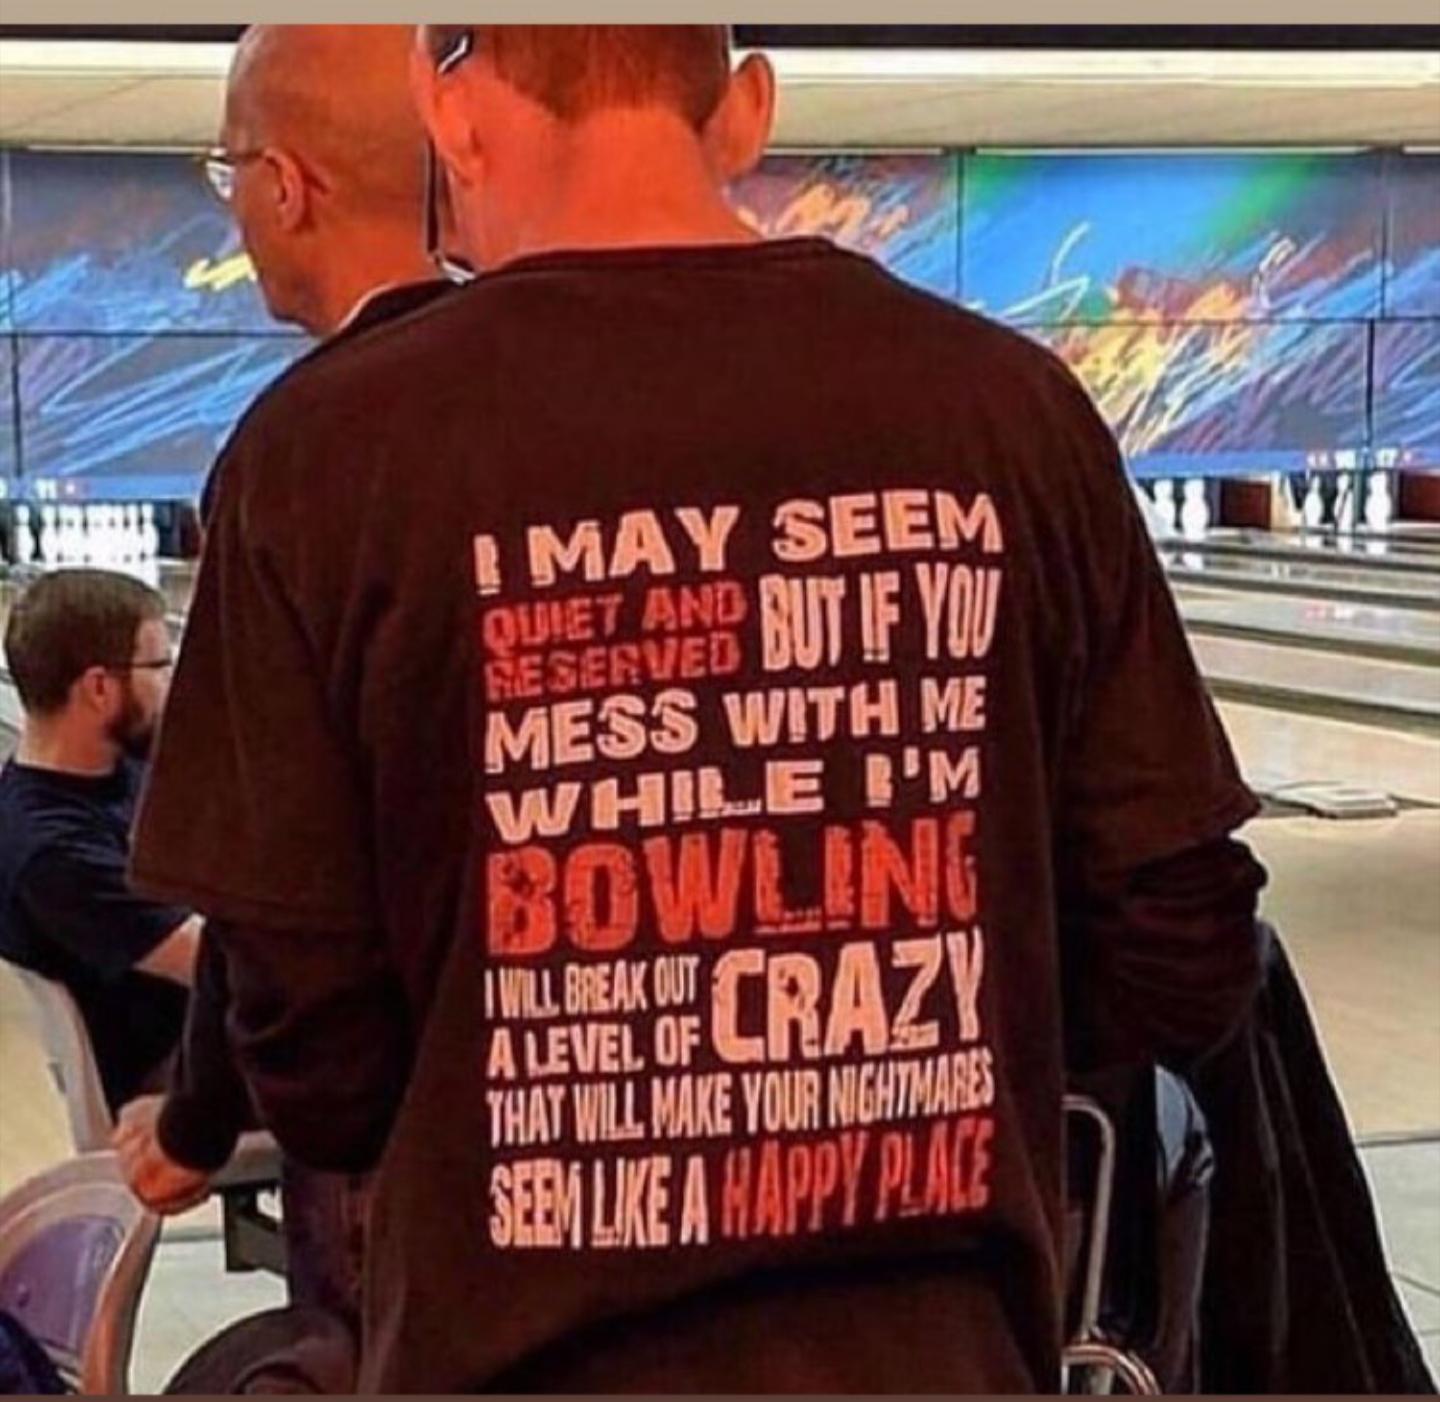 may seem quiet and reserved bowling - May Seem Quiet And But If You Mess With Me While B'M Rowling I Will Break Ou Crazy A Level Of Thay Will Make Your Nightmares Seem A Happy Place